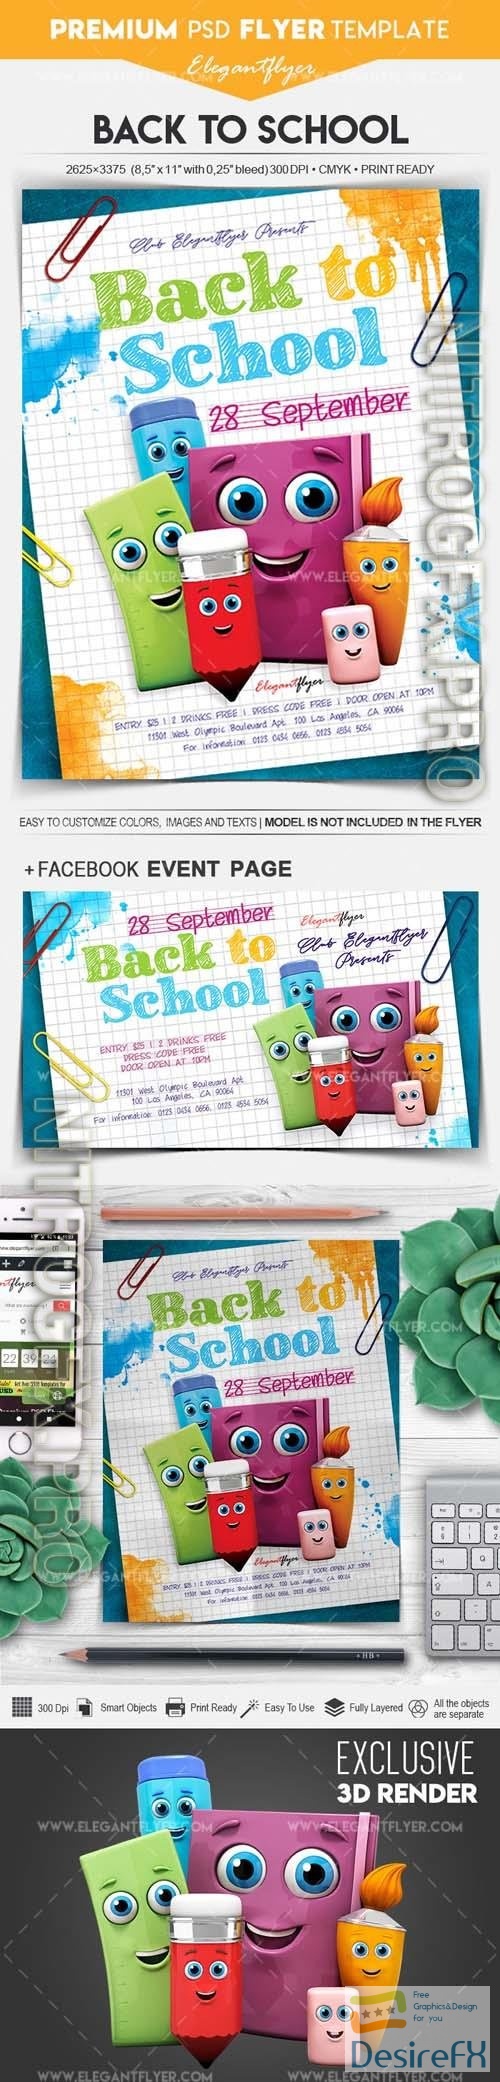 Back to School Flyer PSD Template vol 7